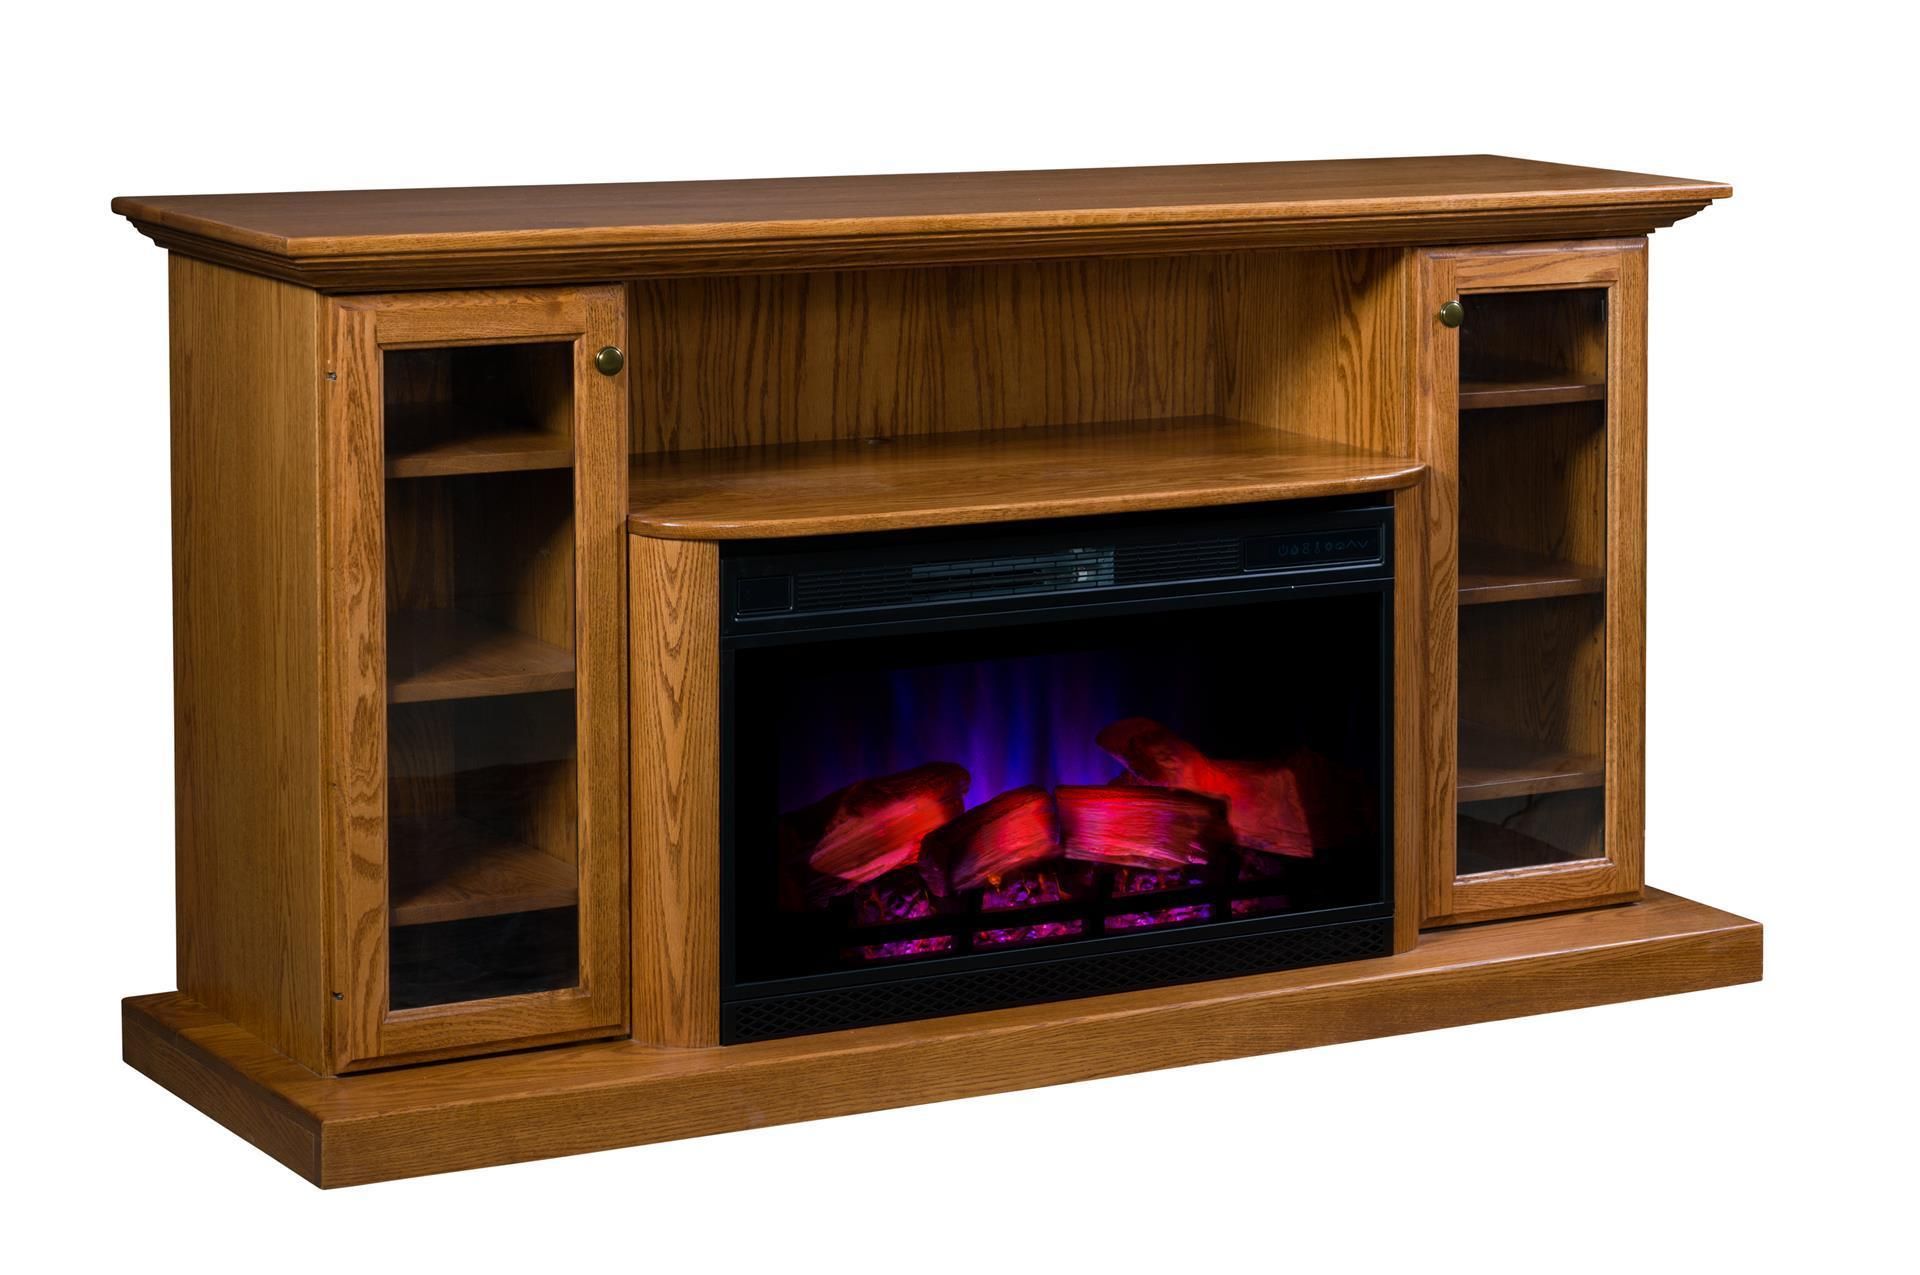 Amish 70" Electric Fireplace Entertainment Center ¦ Dutchcrafters Regarding Electric Fireplace Entertainment Centers (View 6 of 20)